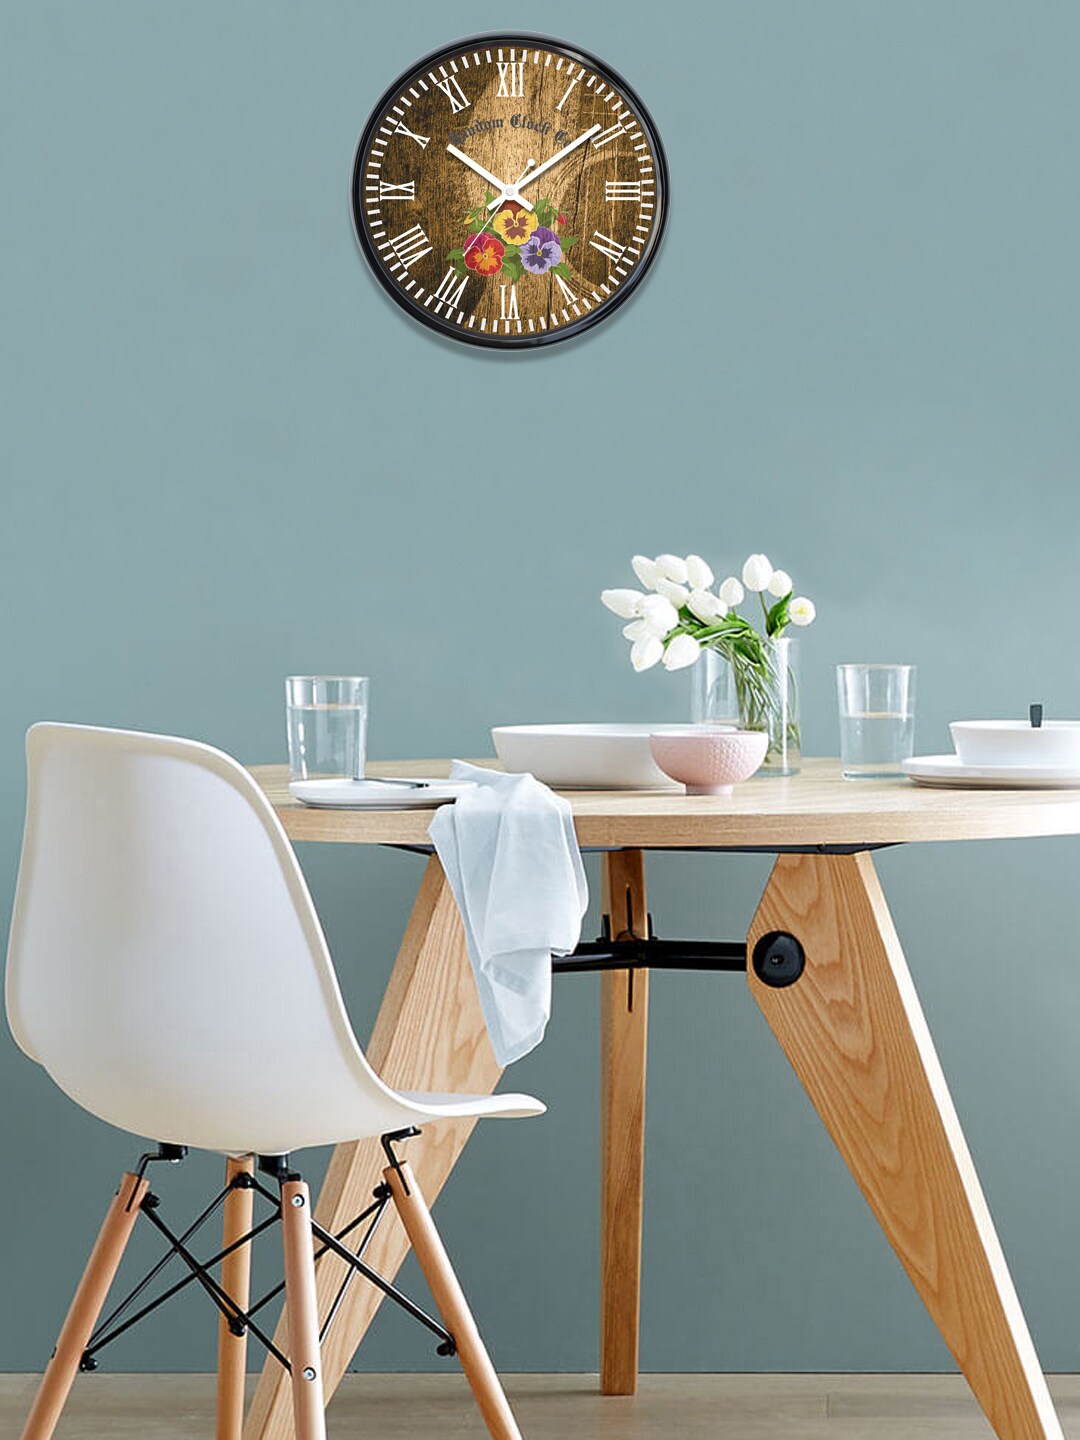 RANDOM Brown Printed Analogue 30.5 cm Wall Clock Price in India